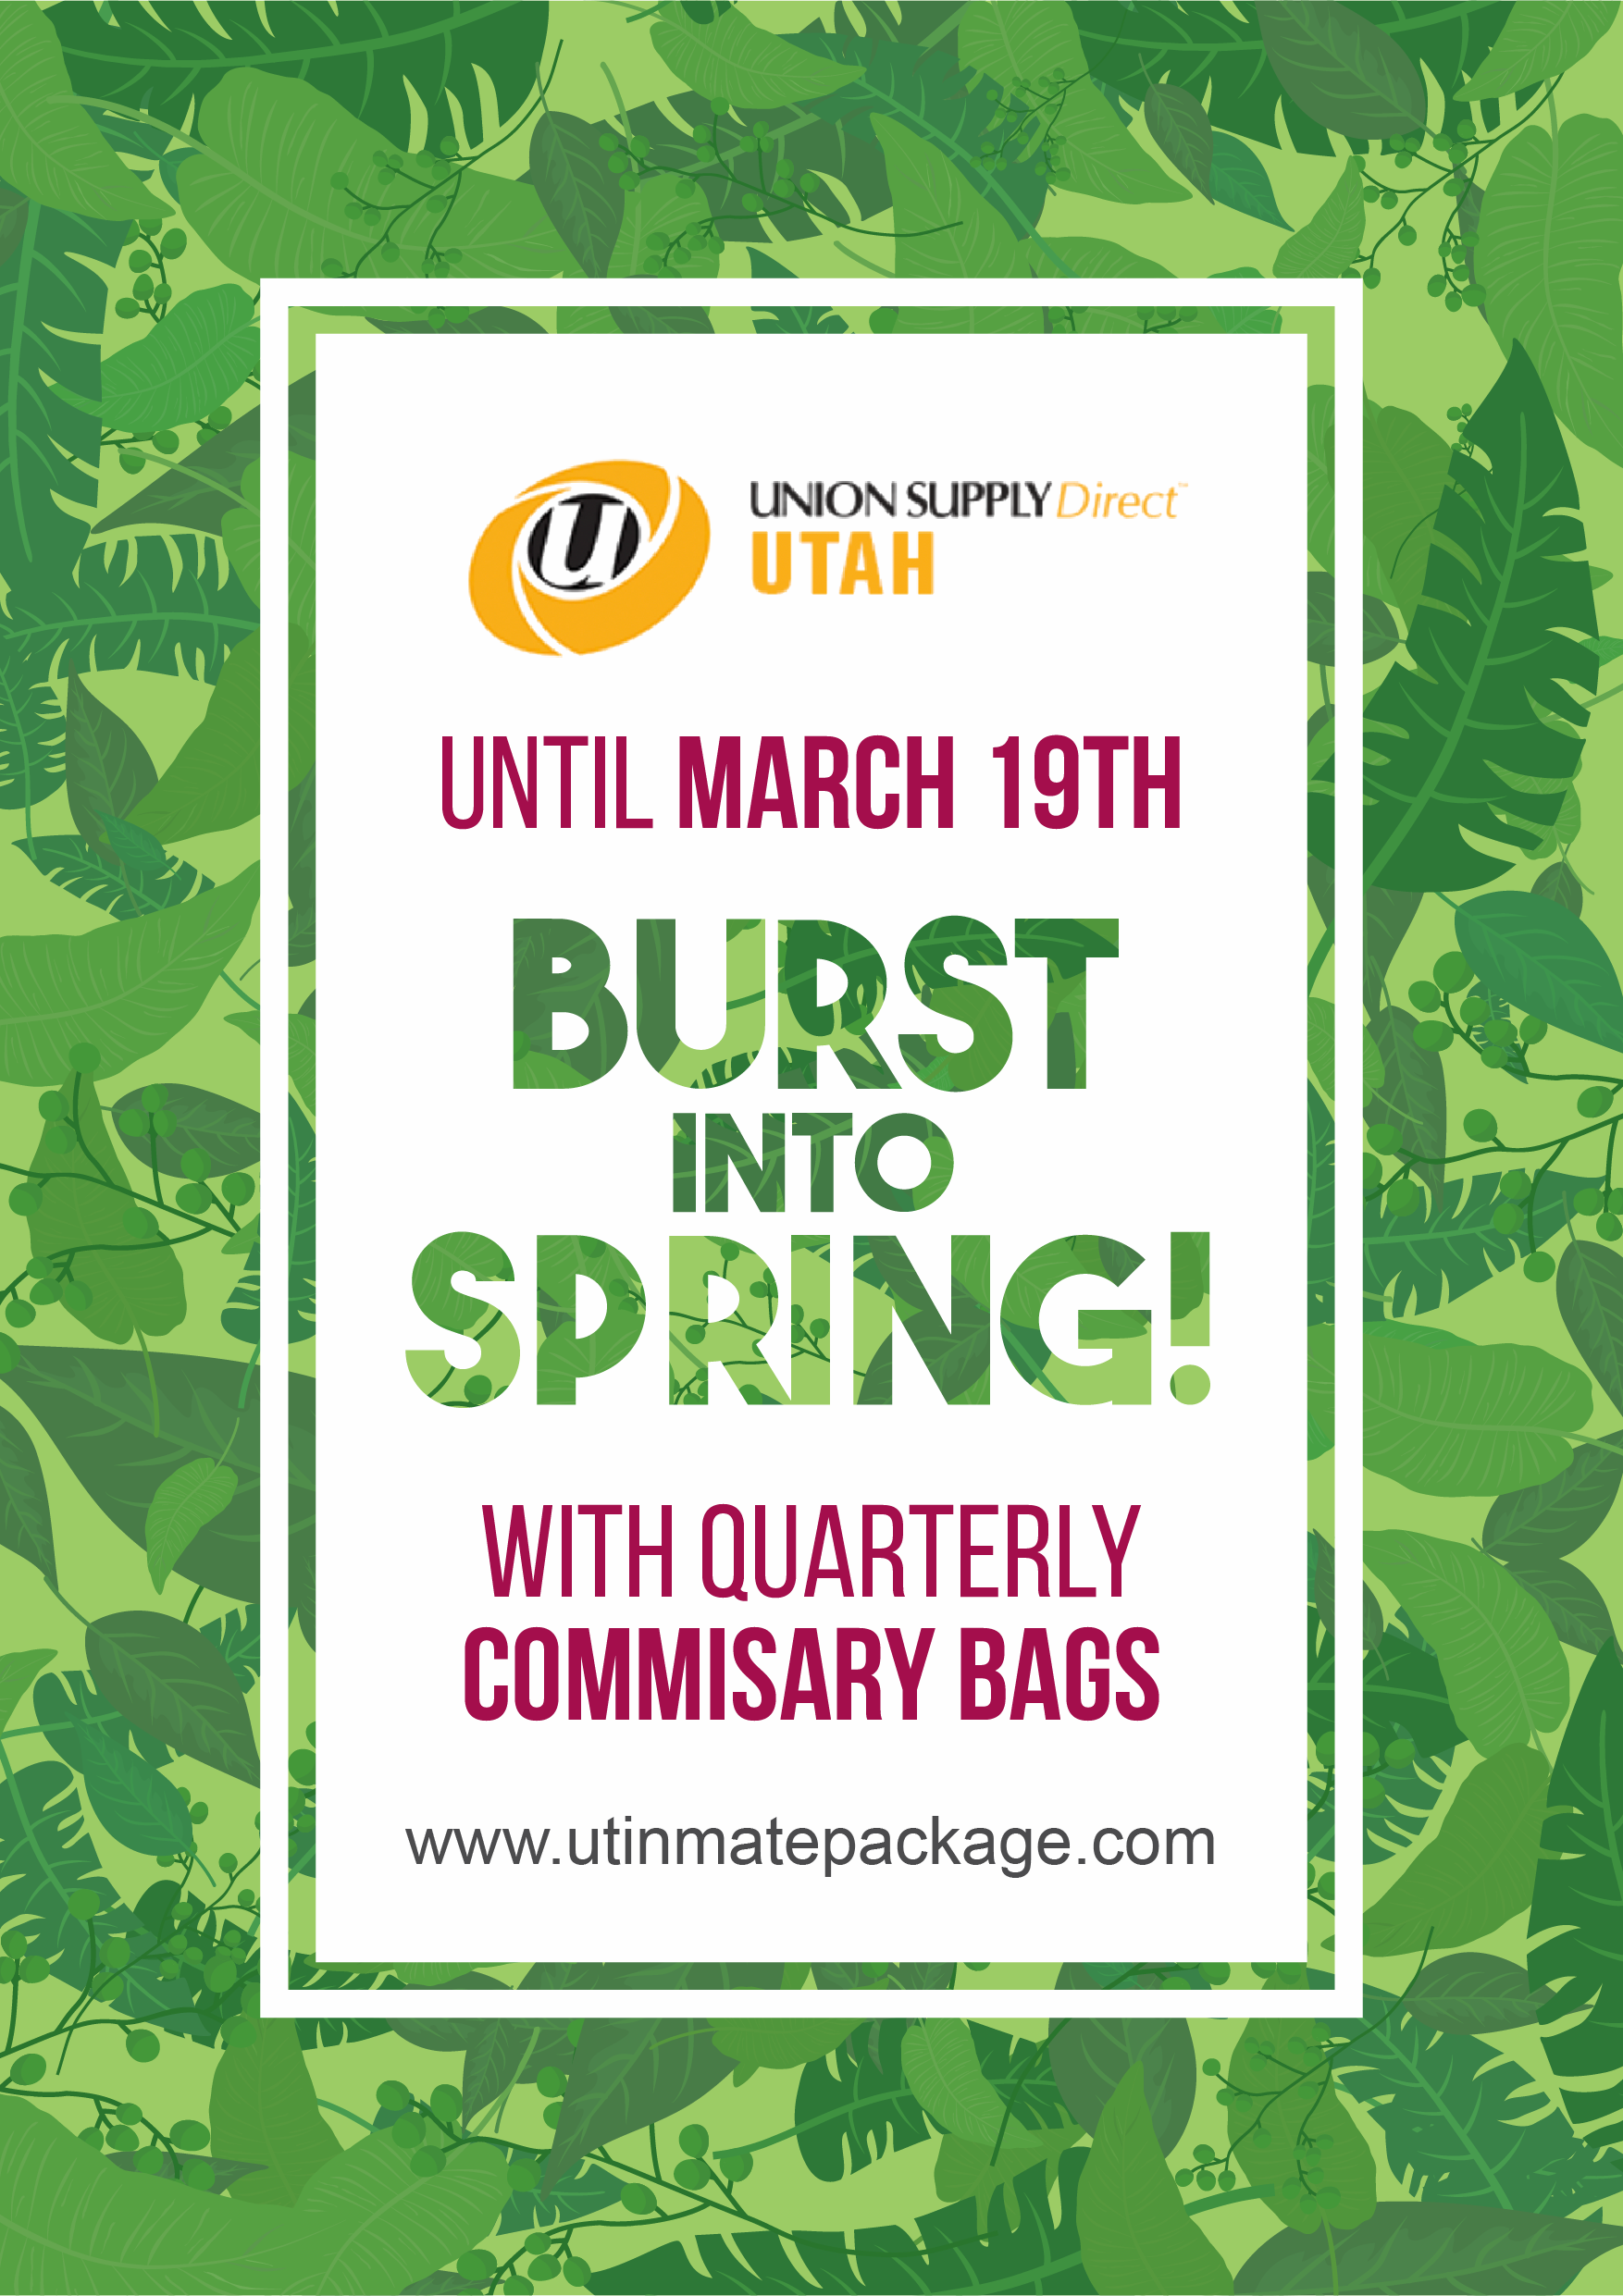 Burst into Spring with a 2023 quarterly commissary bag! Order now via https://www.utinmatepackage.com/Home.aspx